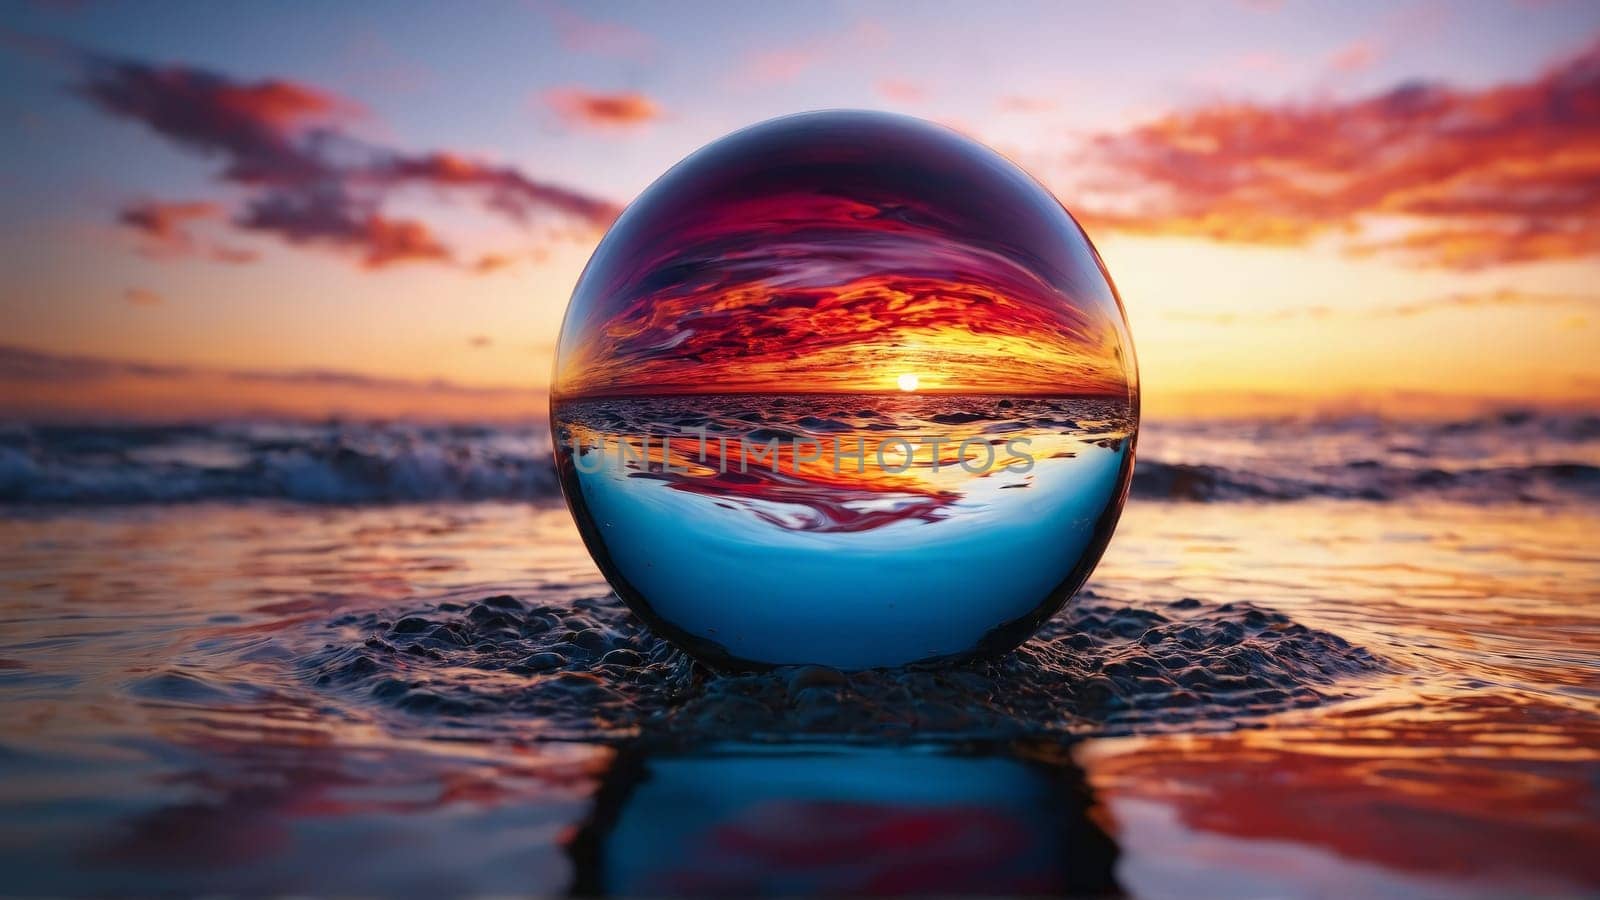 Merlot sphere submerging in tranquil marine mirror smoldering sunset clouds artfully minimalistic marketing pic Abstract background by panophotograph